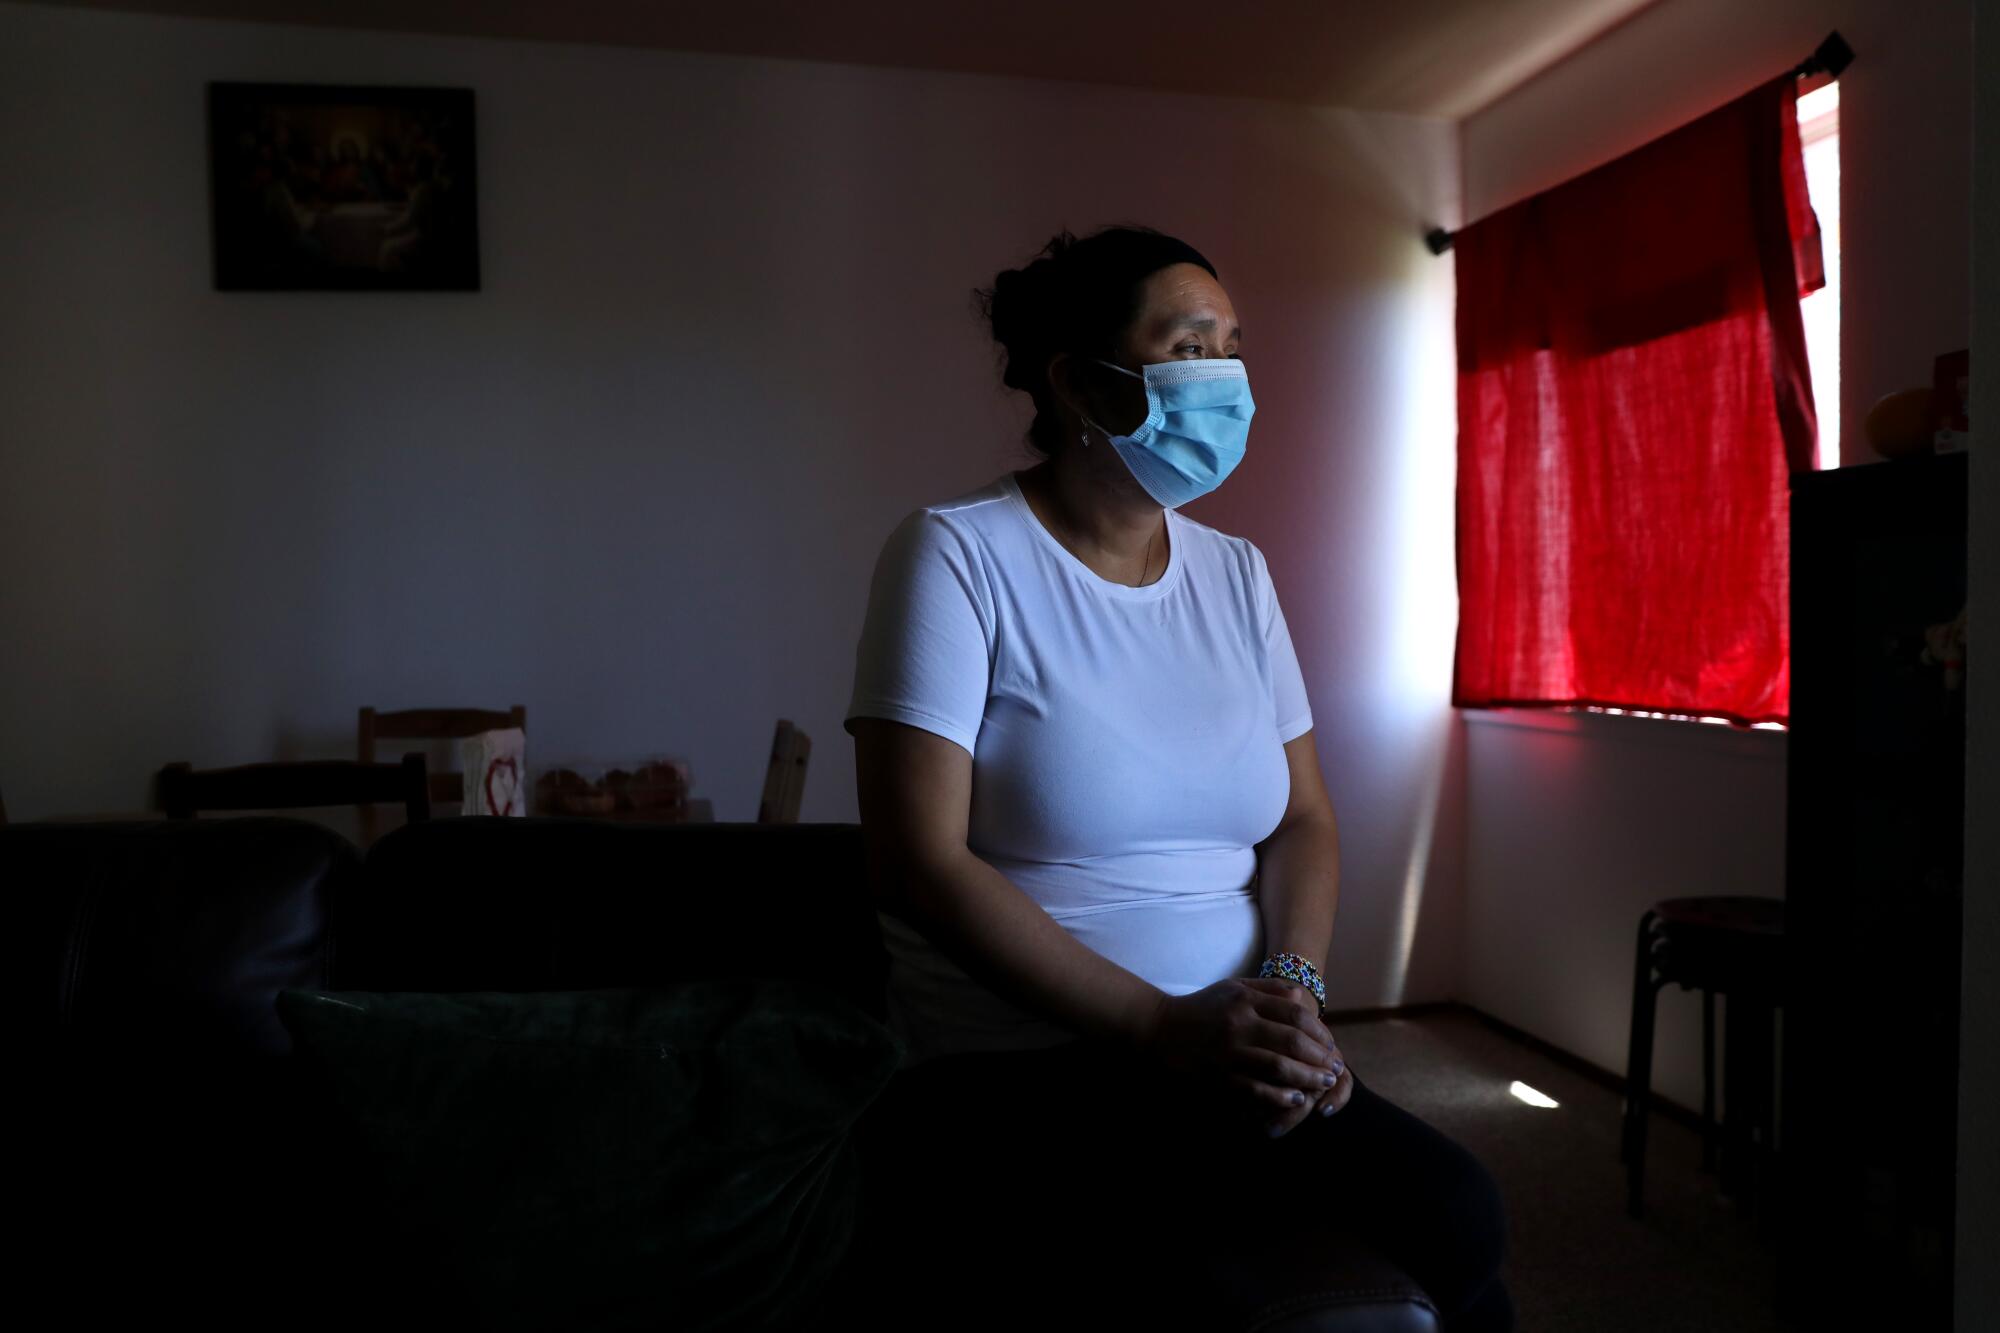 Elsa Hernandez,  a mother of two children, lives with her husband paying $2613 a month in rent in the Mission District